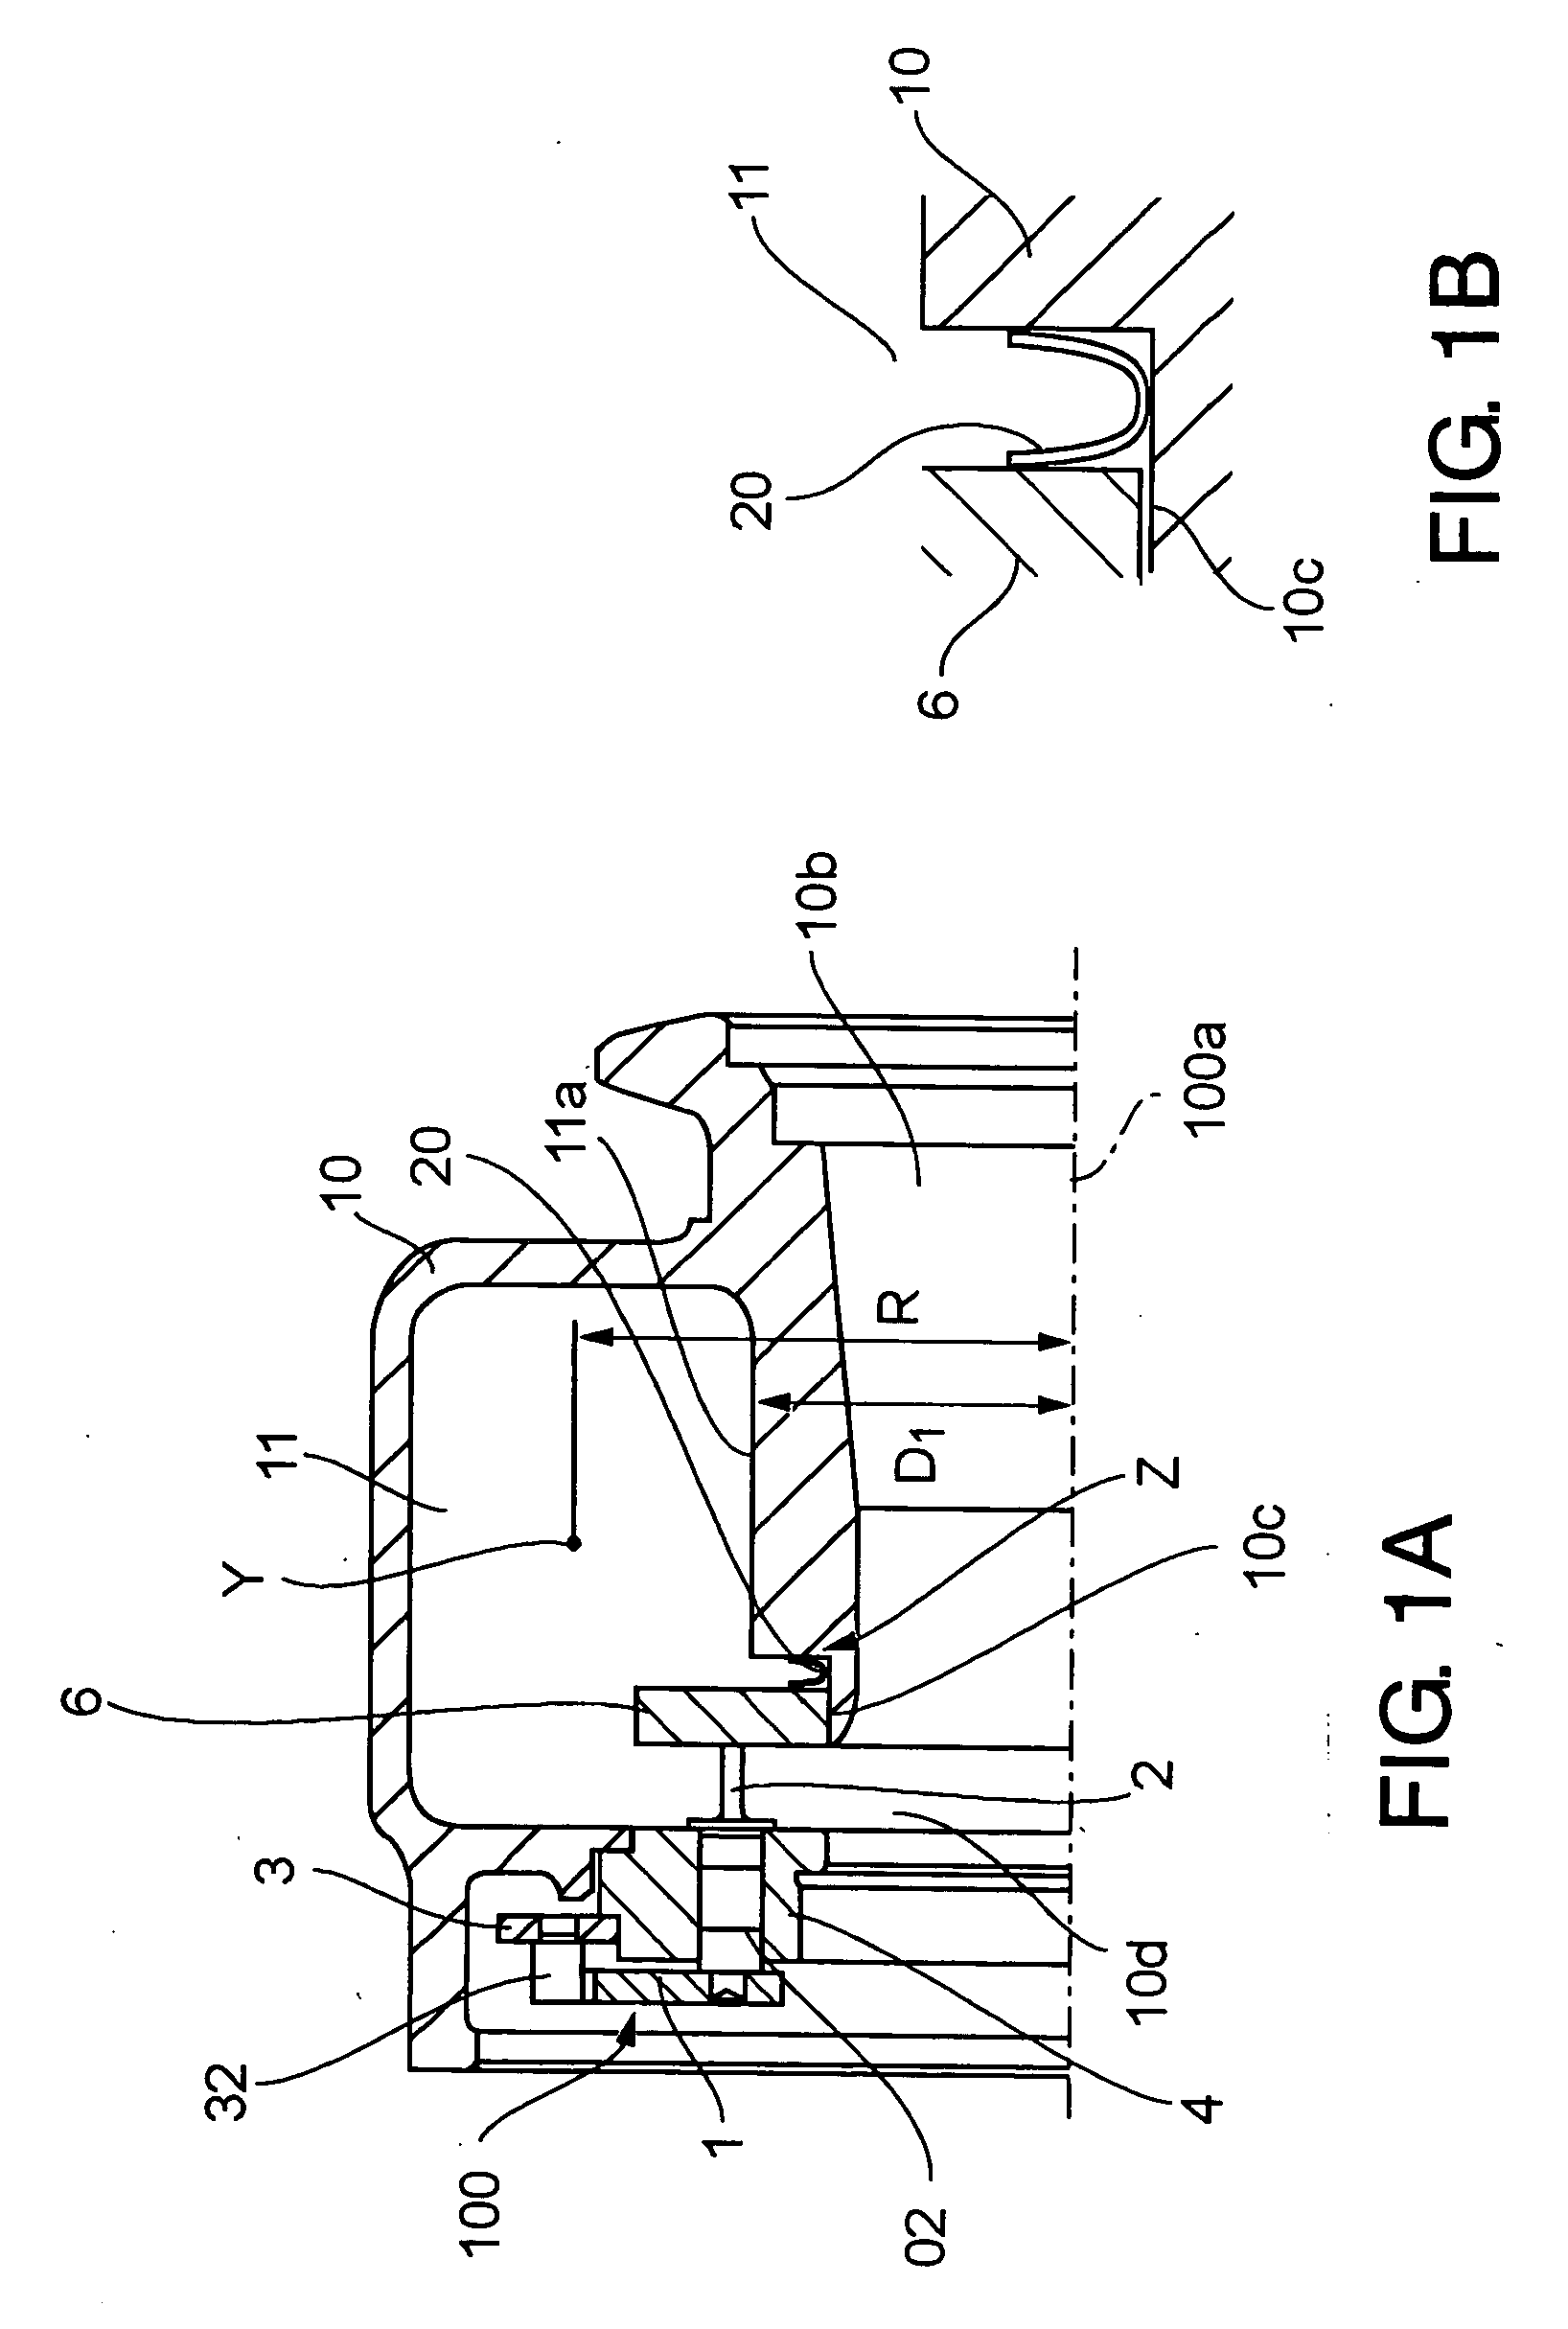 Structure of scroll of variable-throat exhaust turbocharger and method for manufacturing the turbocharger